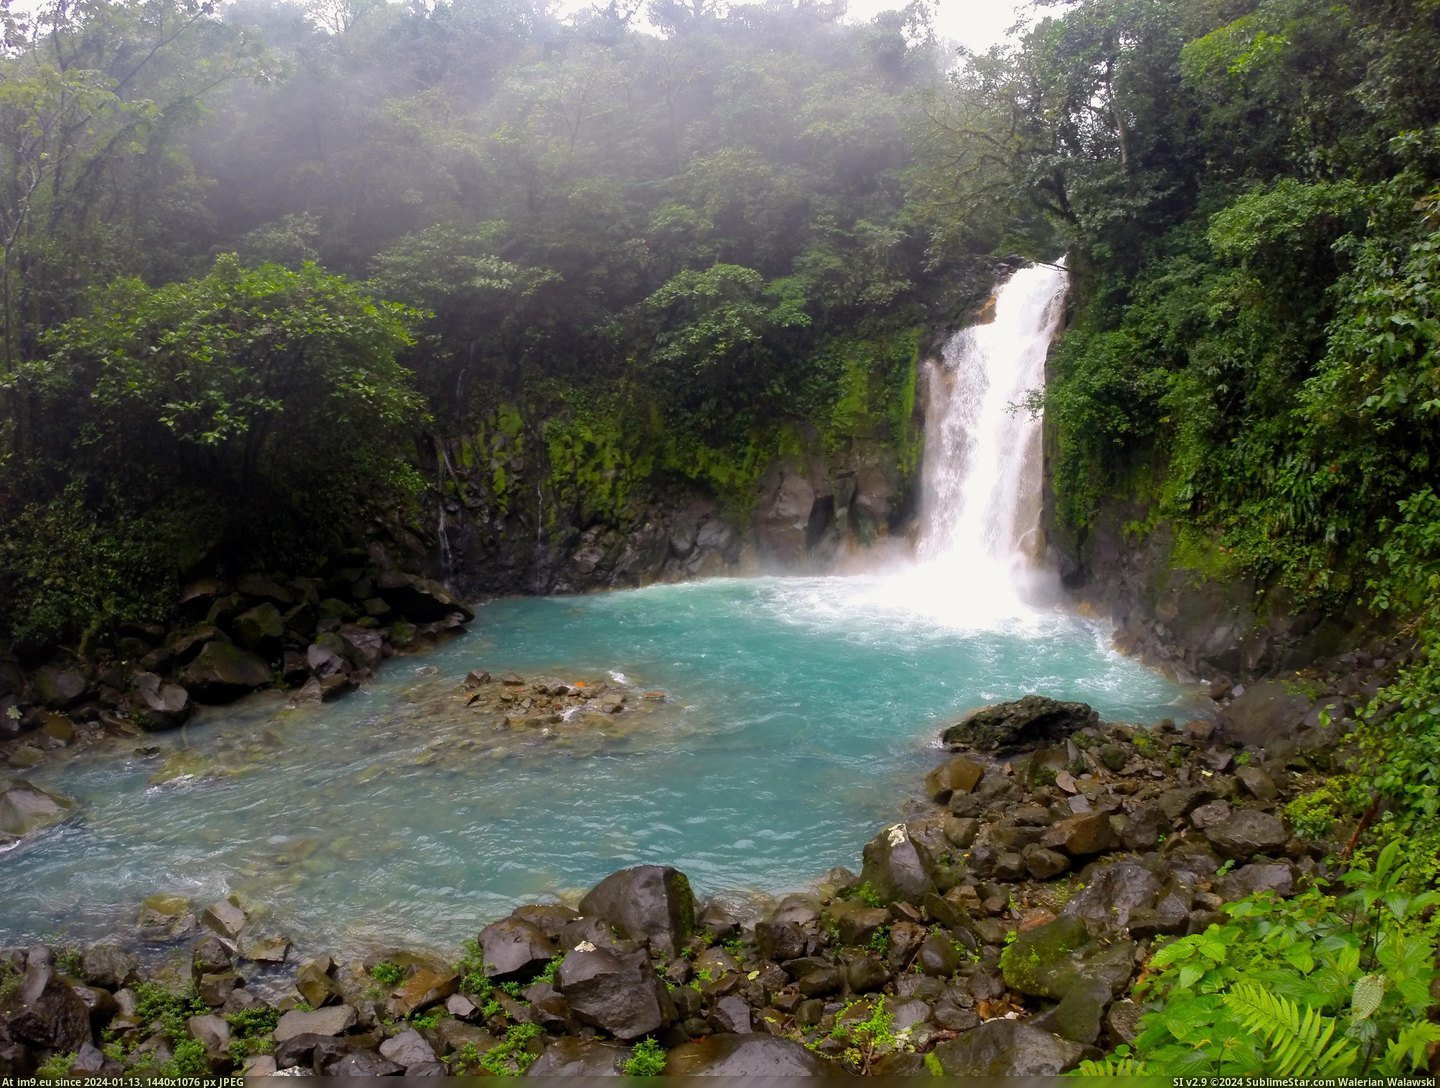 #Morning #Waterfall #4000x3000 #Celeste #Foggy #Rio #Costa #Rica [Earthporn] Foggy morning at Rio Celeste waterfall in Costa Rica  [4000x3000] Pic. (Image of album My r/EARTHPORN favs))